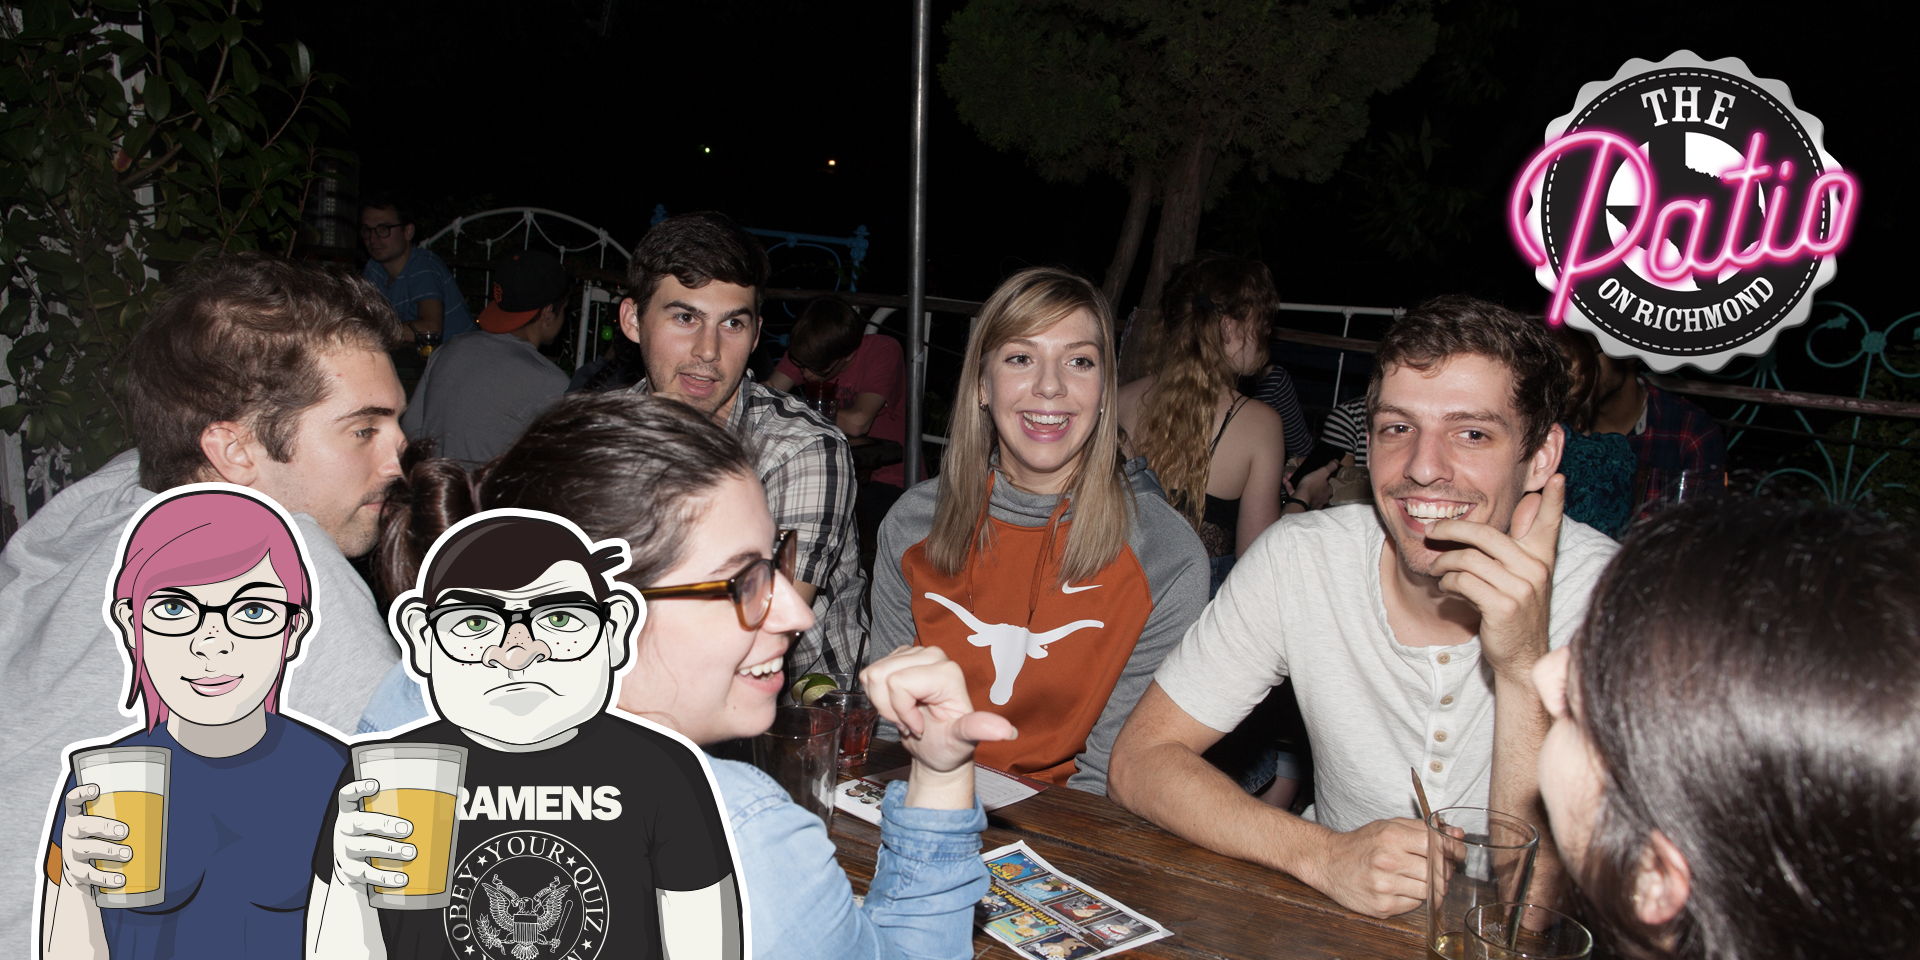 Geeks Who Drink Trivia Night at The Patio at The Pit Room promotional image